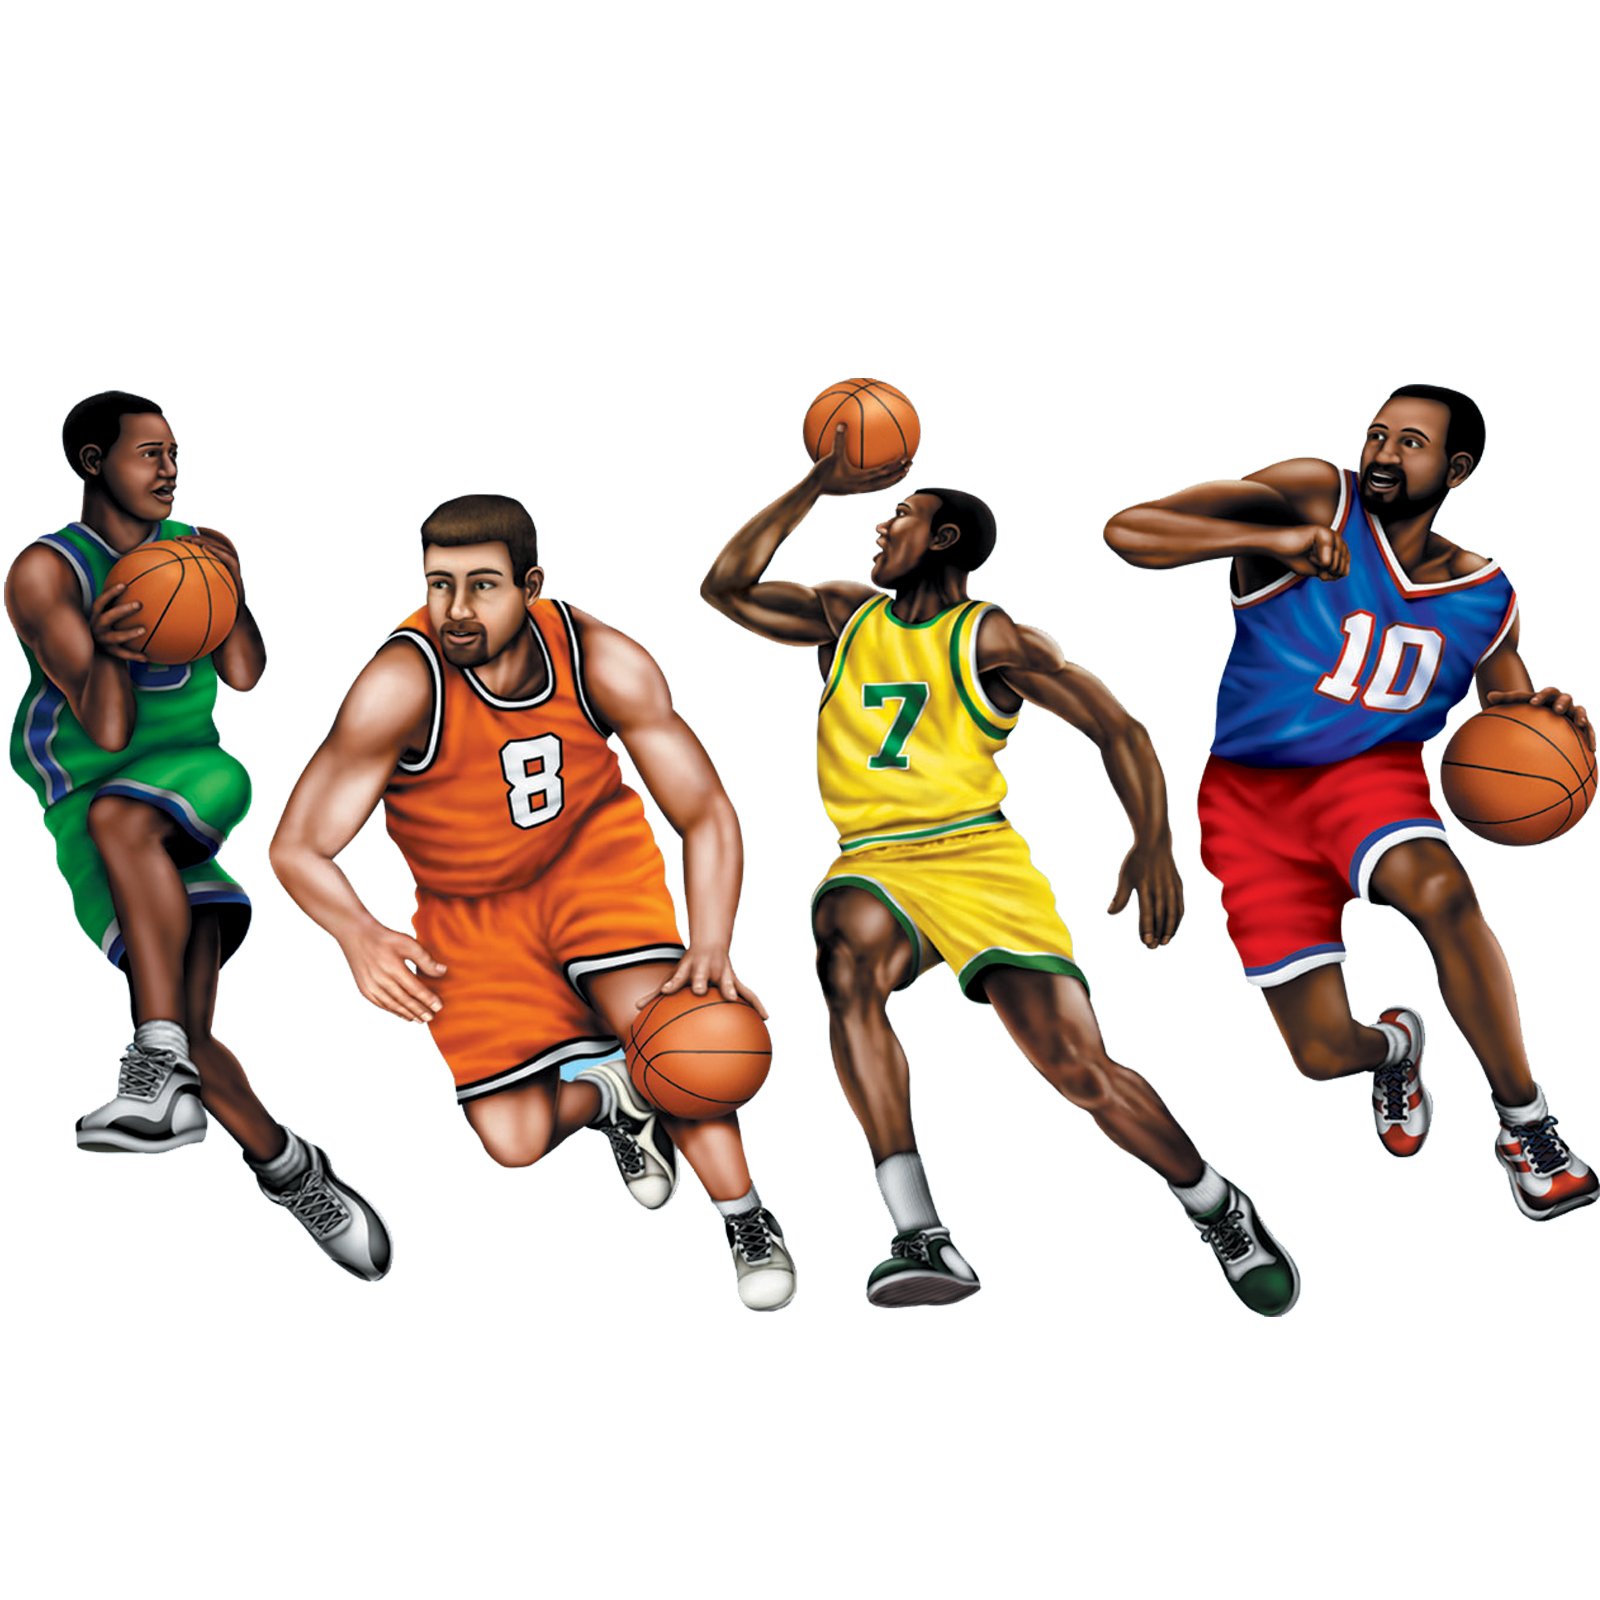 Basketball Player Animation Terms of use - The Cliparts